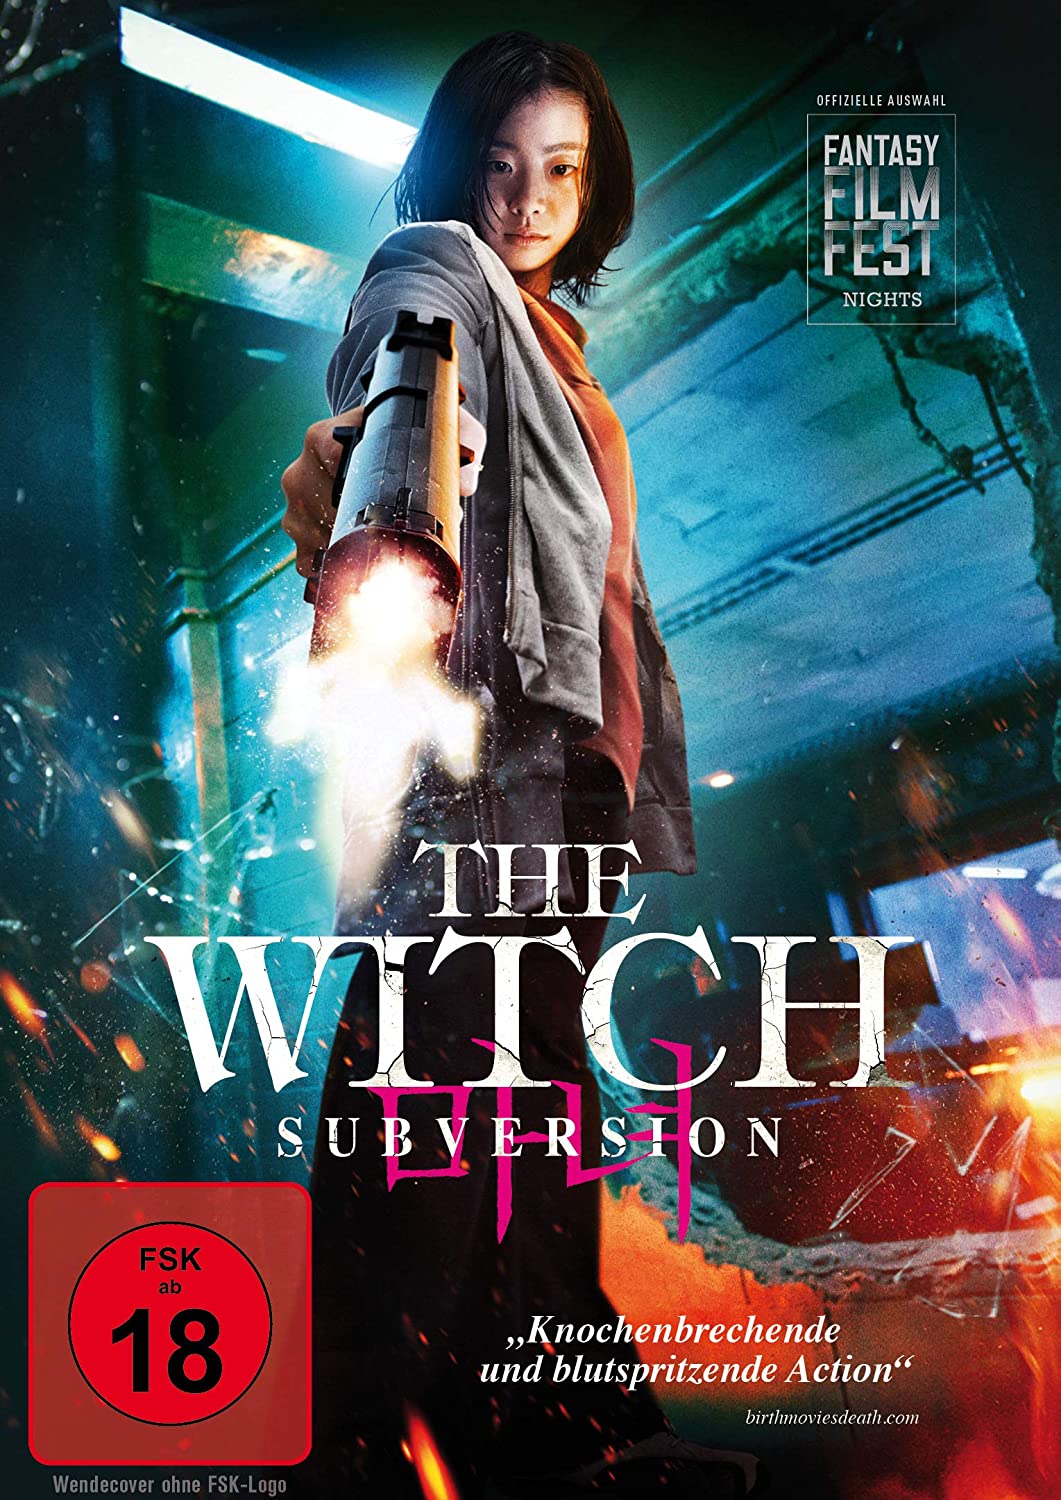 The Witch: Part 1 – The Subversion Poster